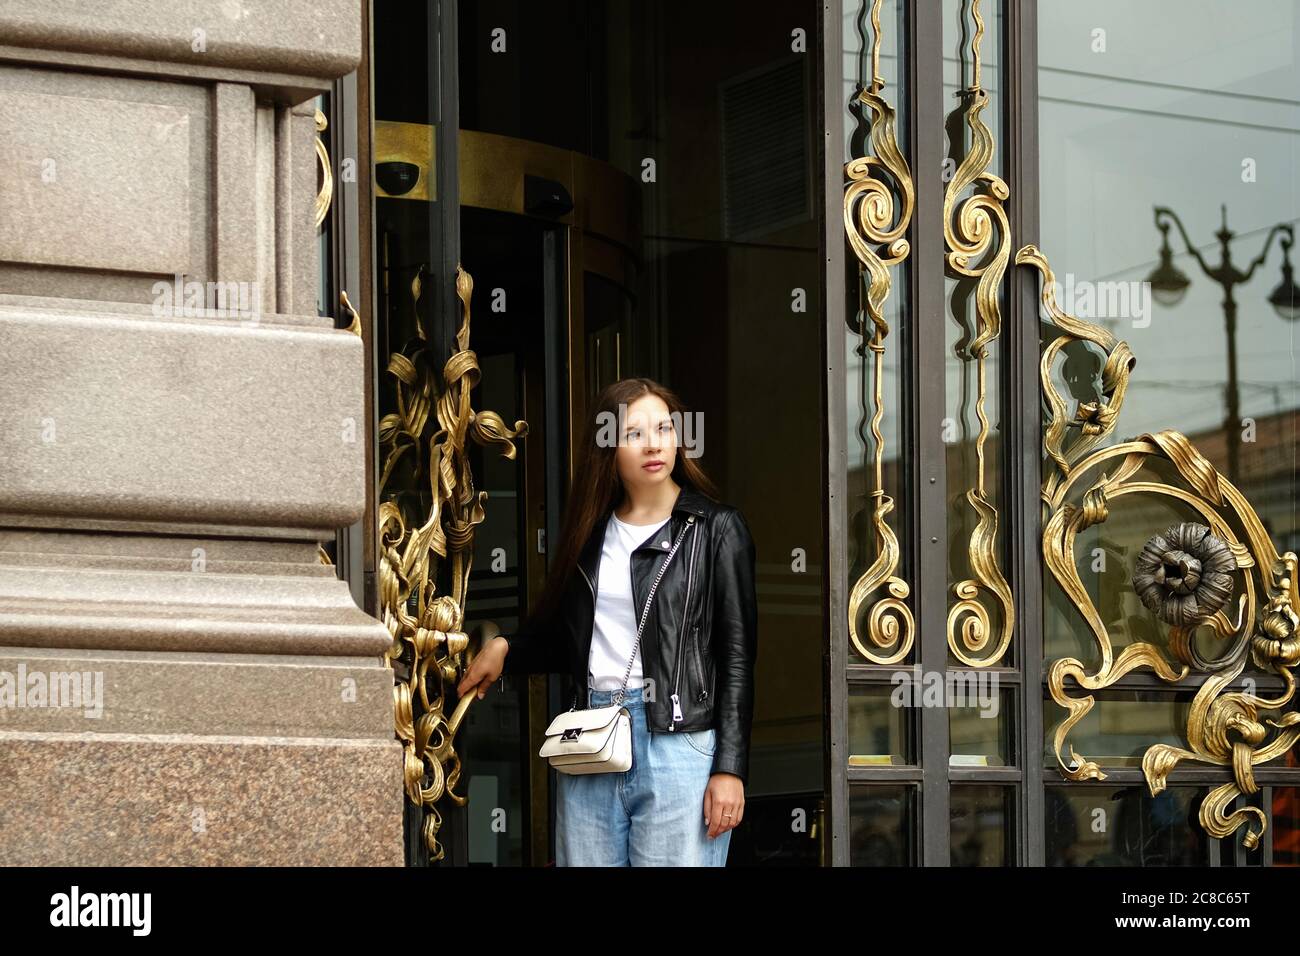 Young woman with long hair going out of old vintage building through ornated glass door to the street of a big city. Saint Petersburg, Russia. Stock Photo